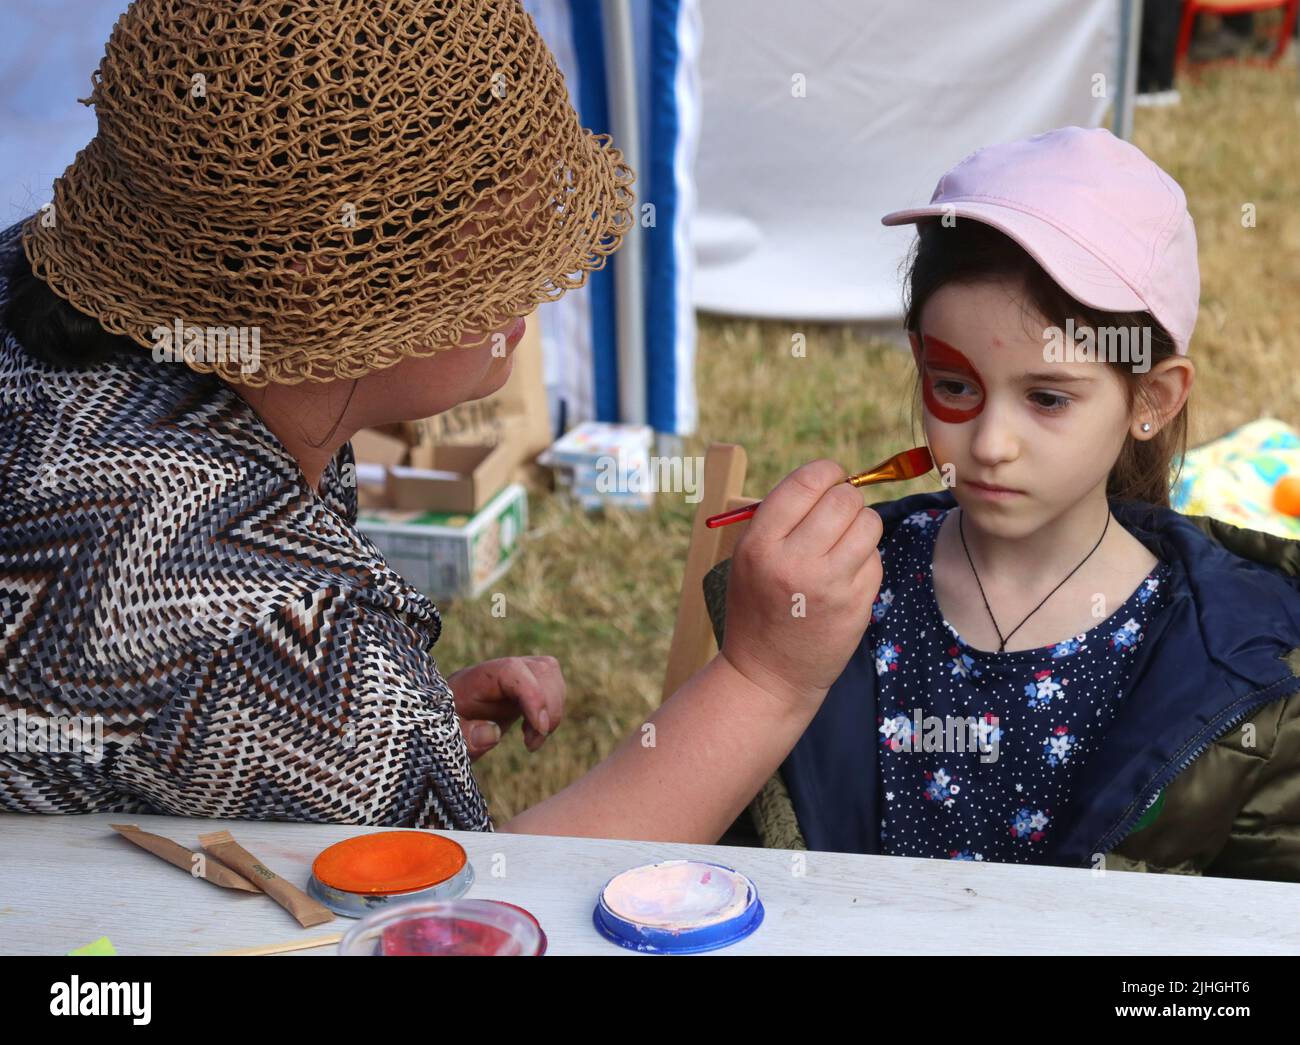 Cracow. Krakow. Poland. Open air fete for Ukraine refugees (mostly women and children) and their Polish hosts held in one of the city parks. Stock Photo